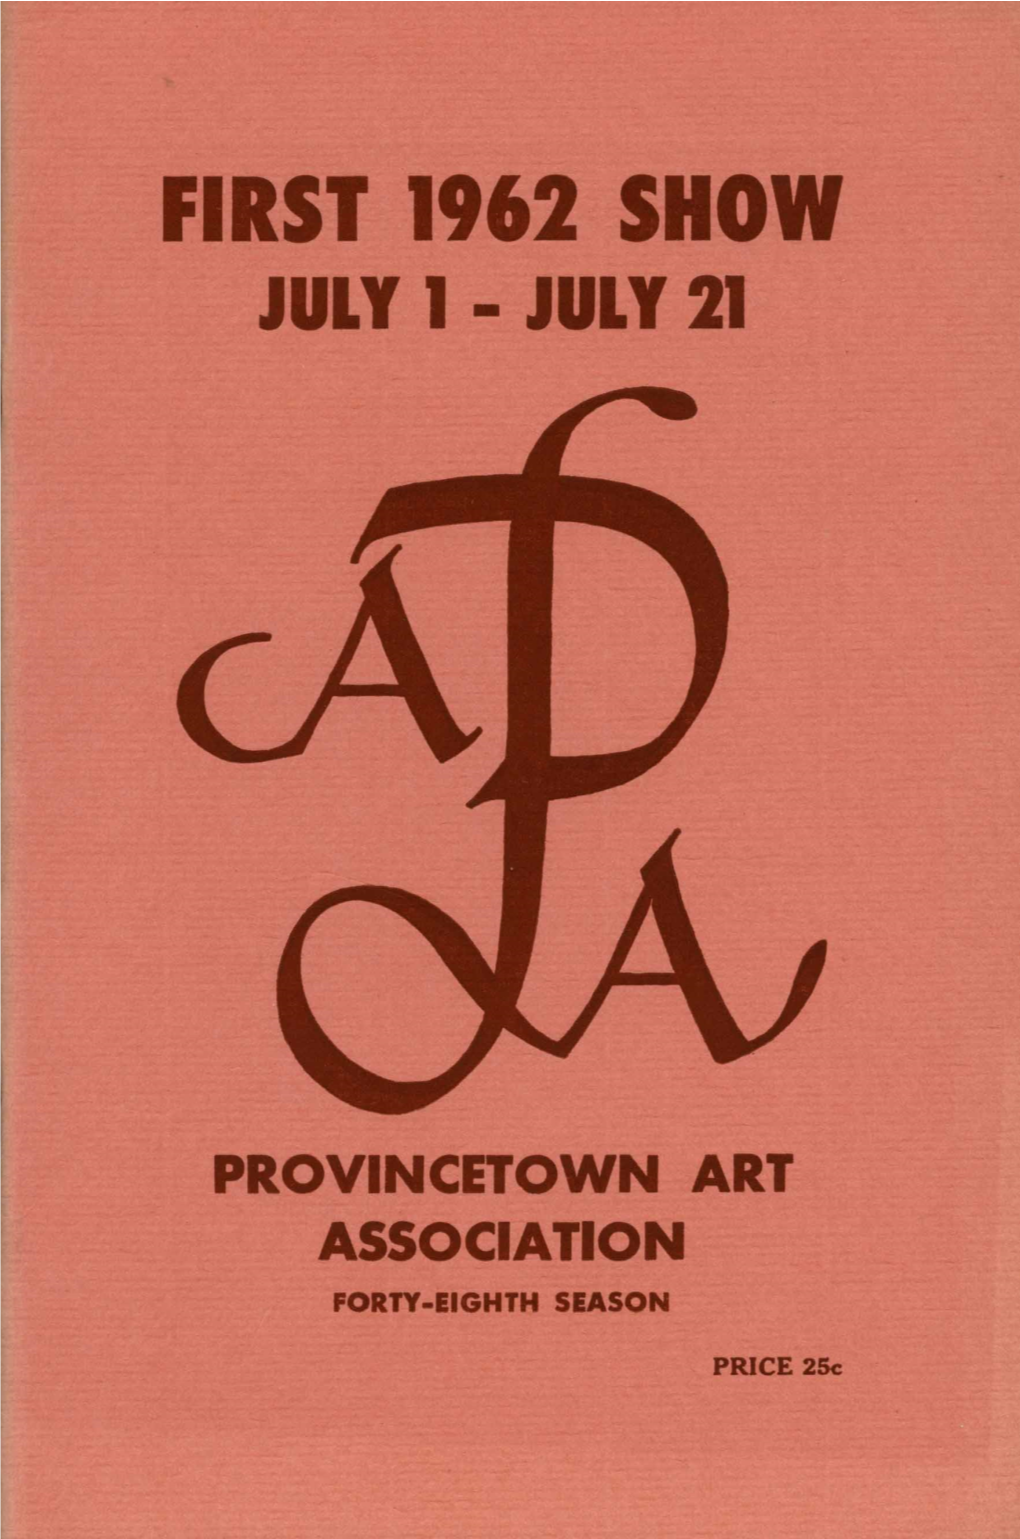 First 1962 Show July 1 July 21